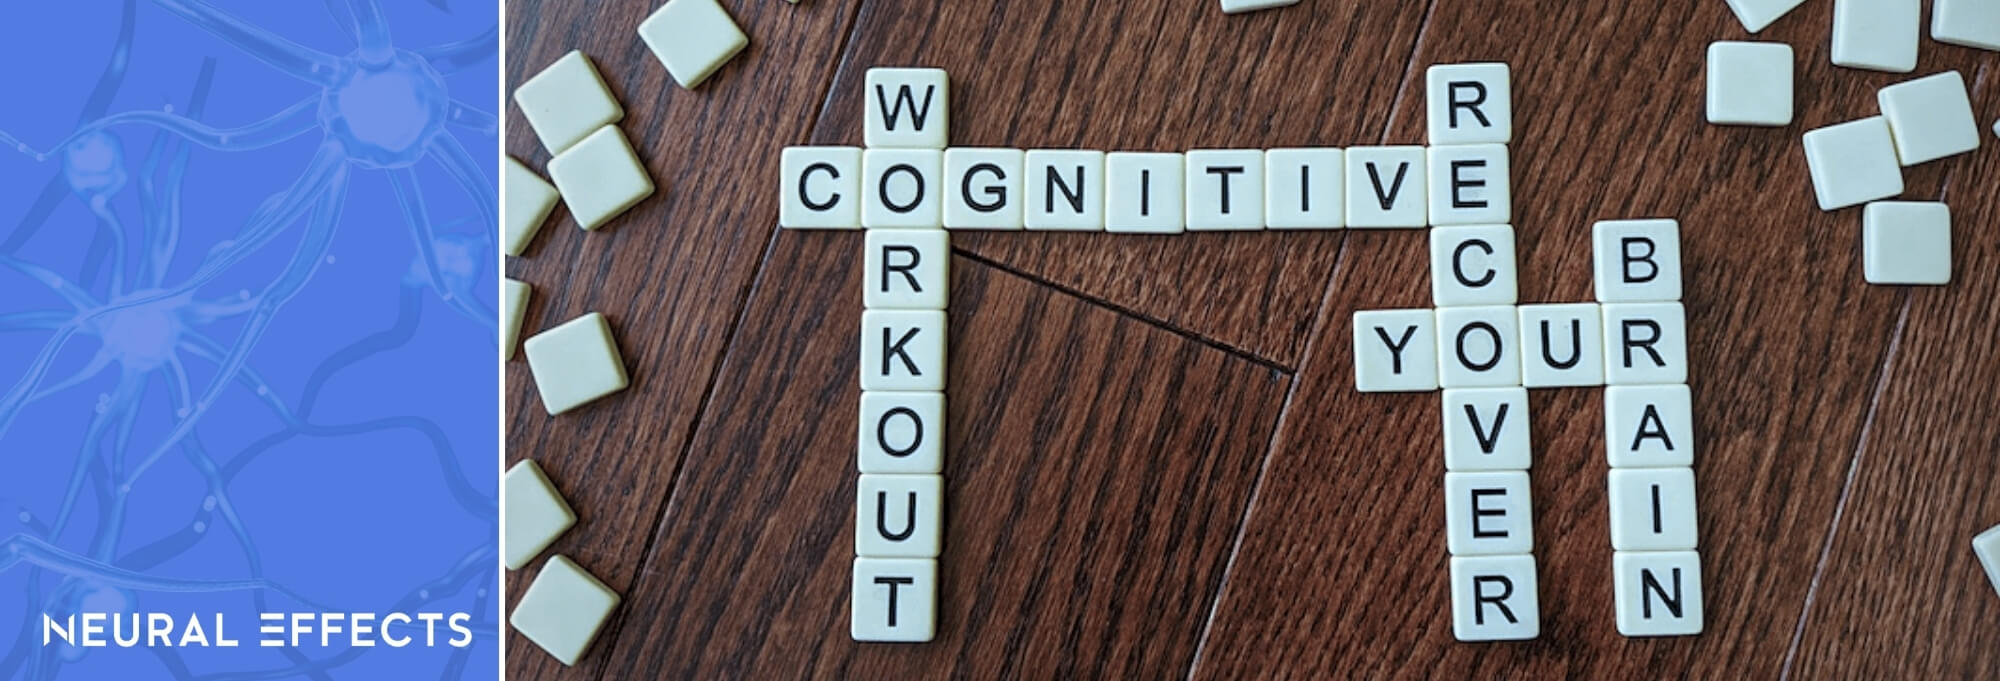 10+ Cognitive Activities To Keep Elderly Mentally Stimulated